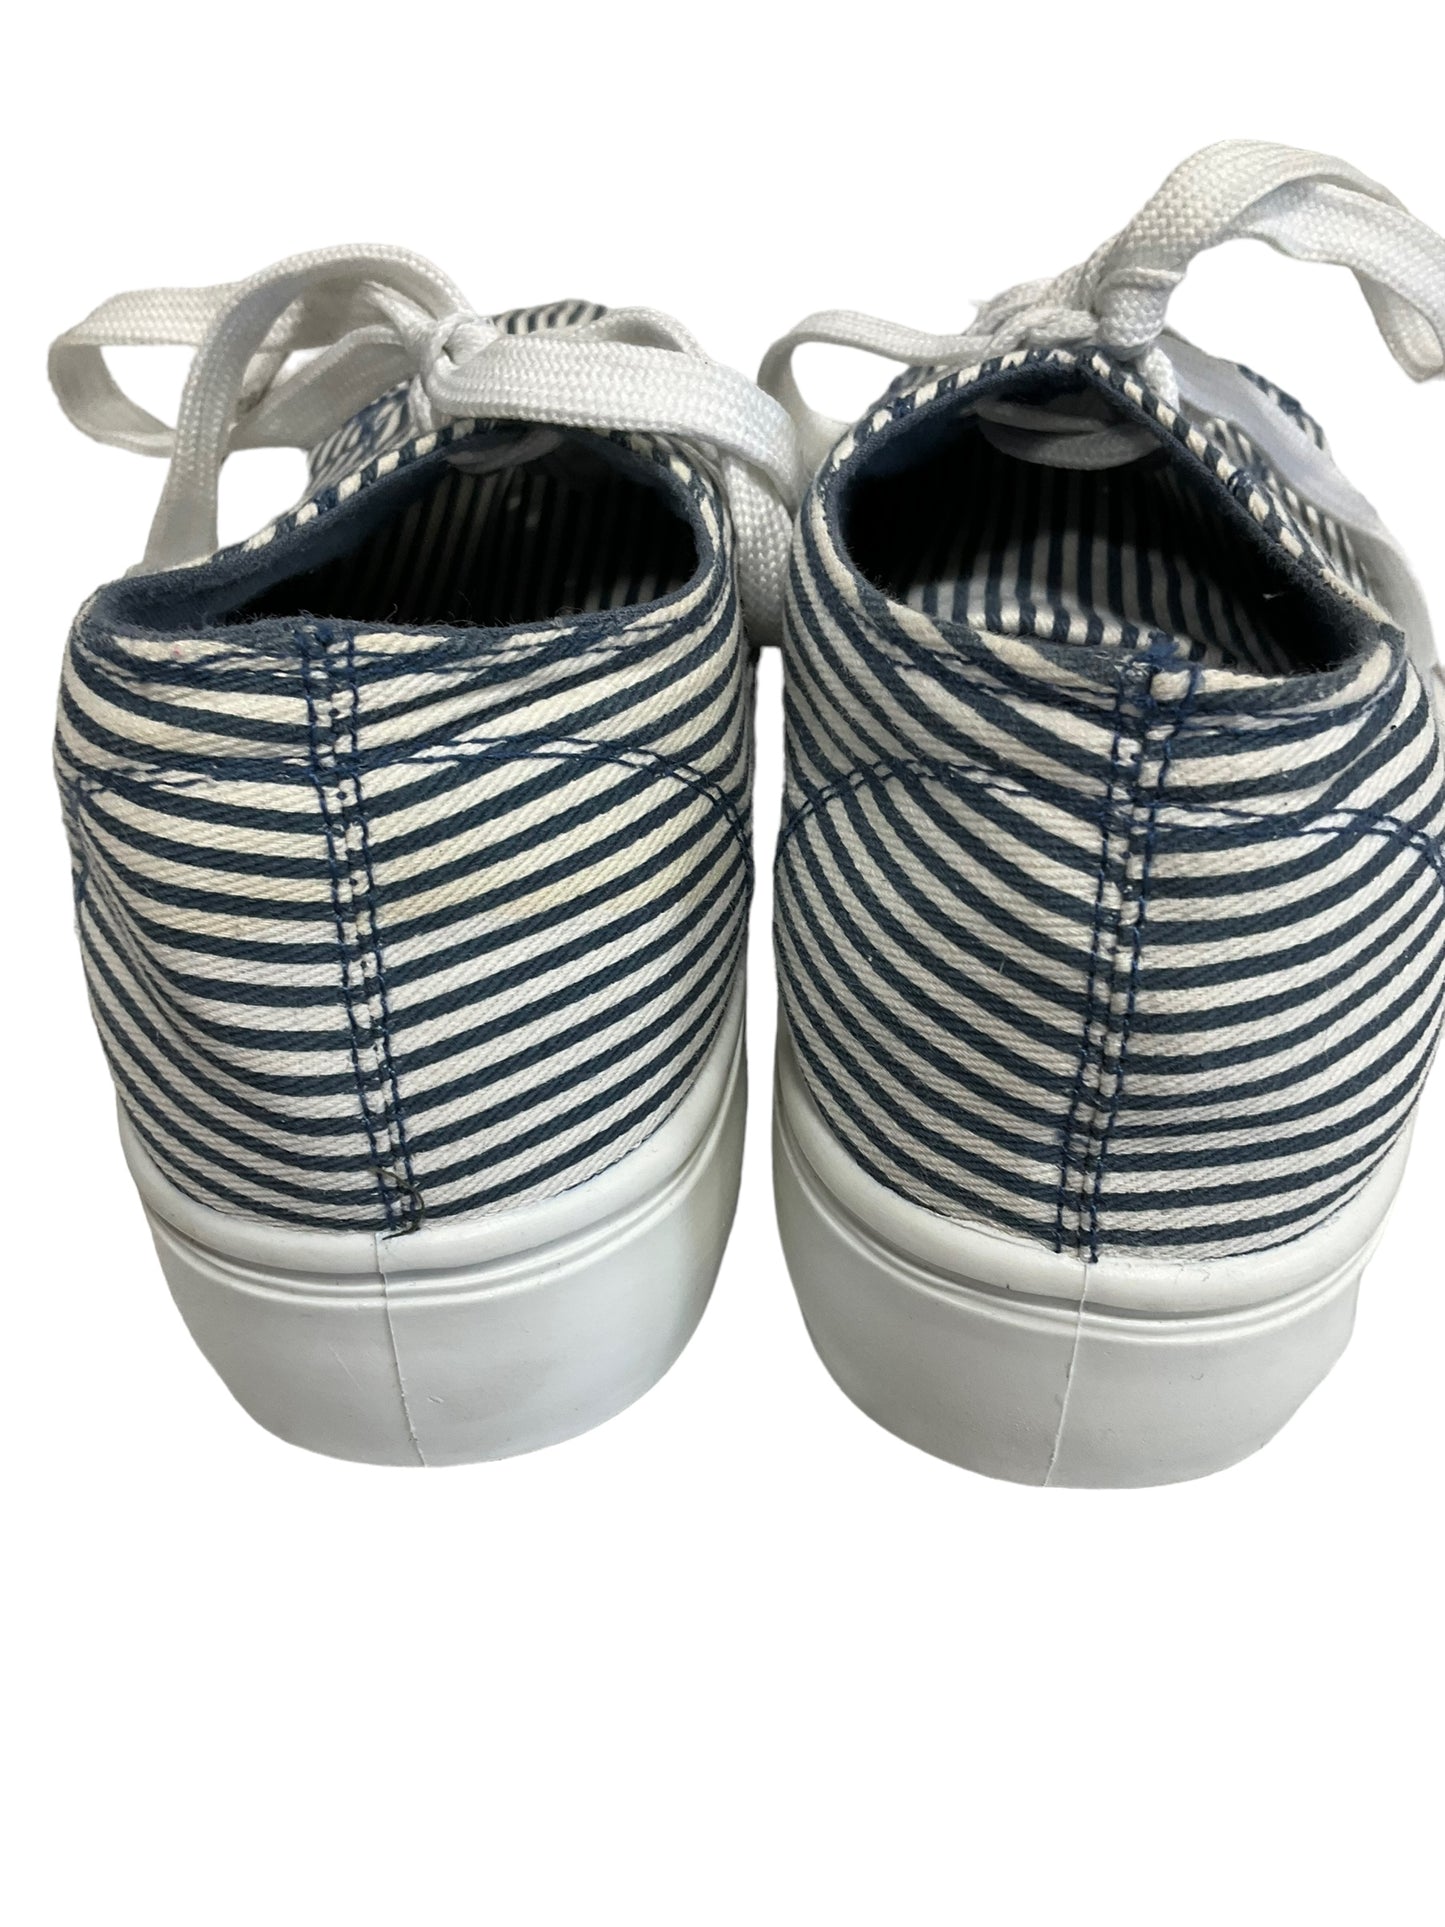 Shoes Sneakers By Bamboo  Size: 7